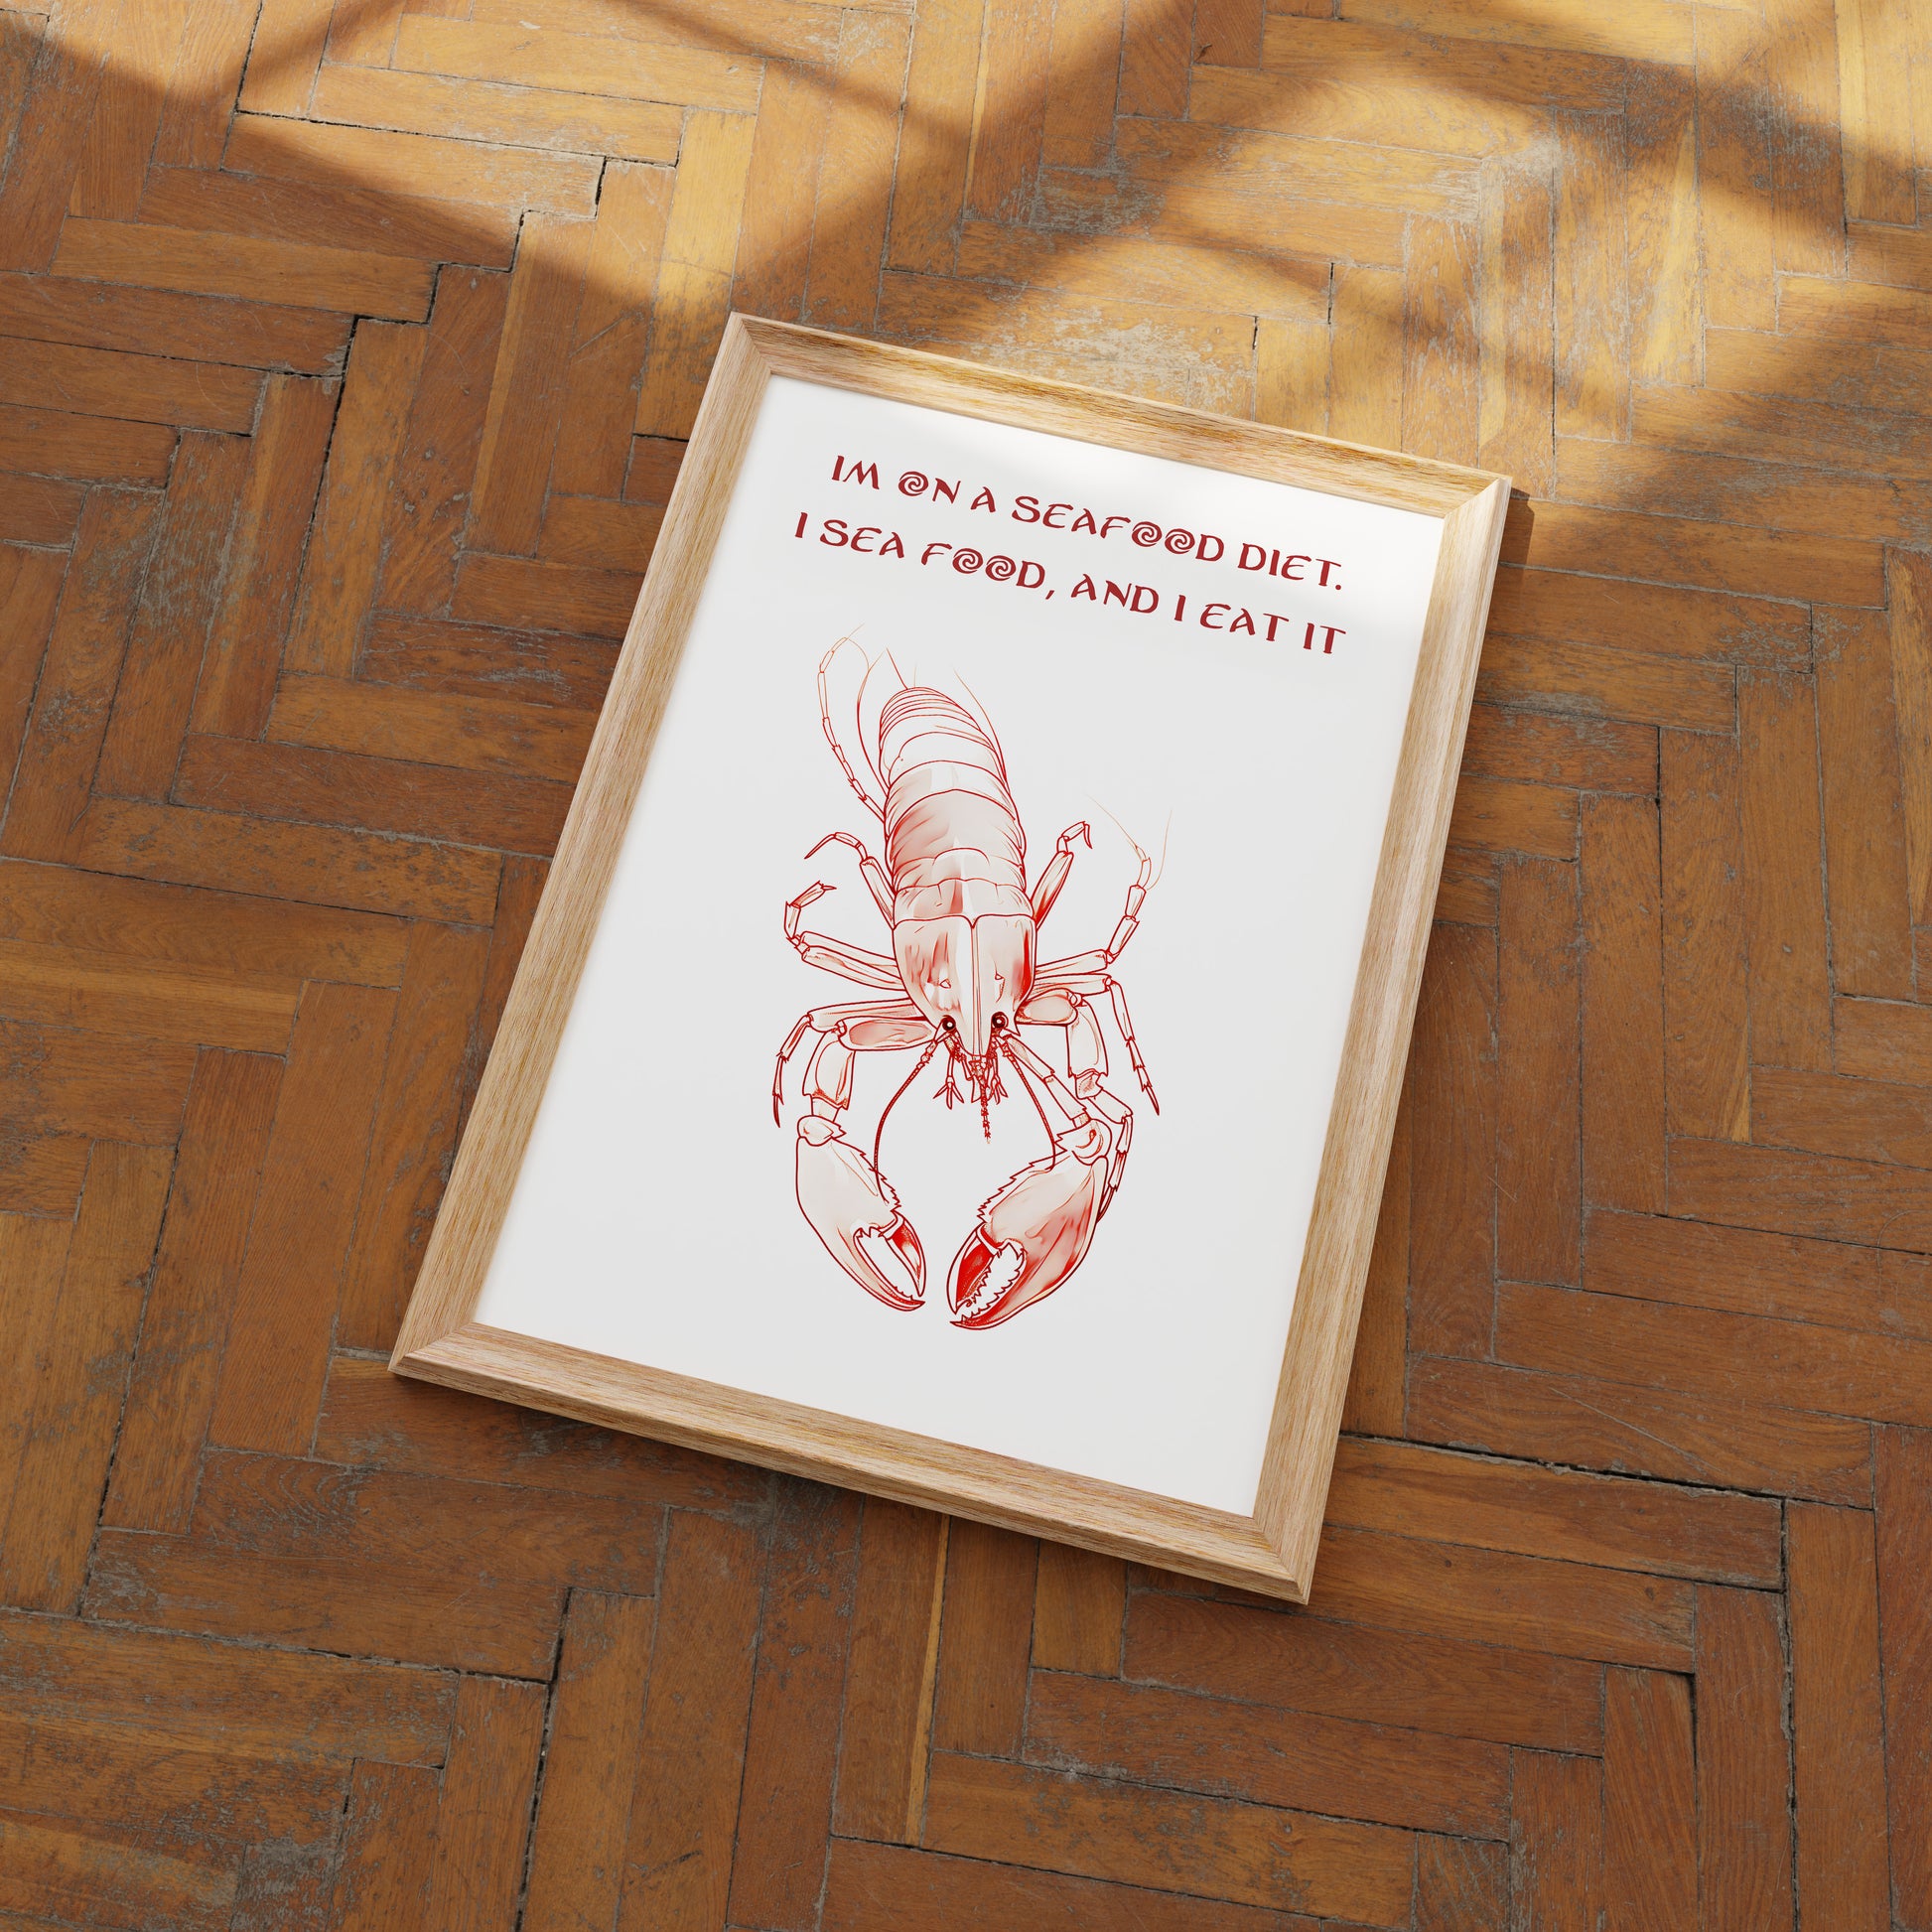 A framed picture of a lobster with a pun "I'm on a seafood diet. I see food, and I eat it" on a wooden floor.